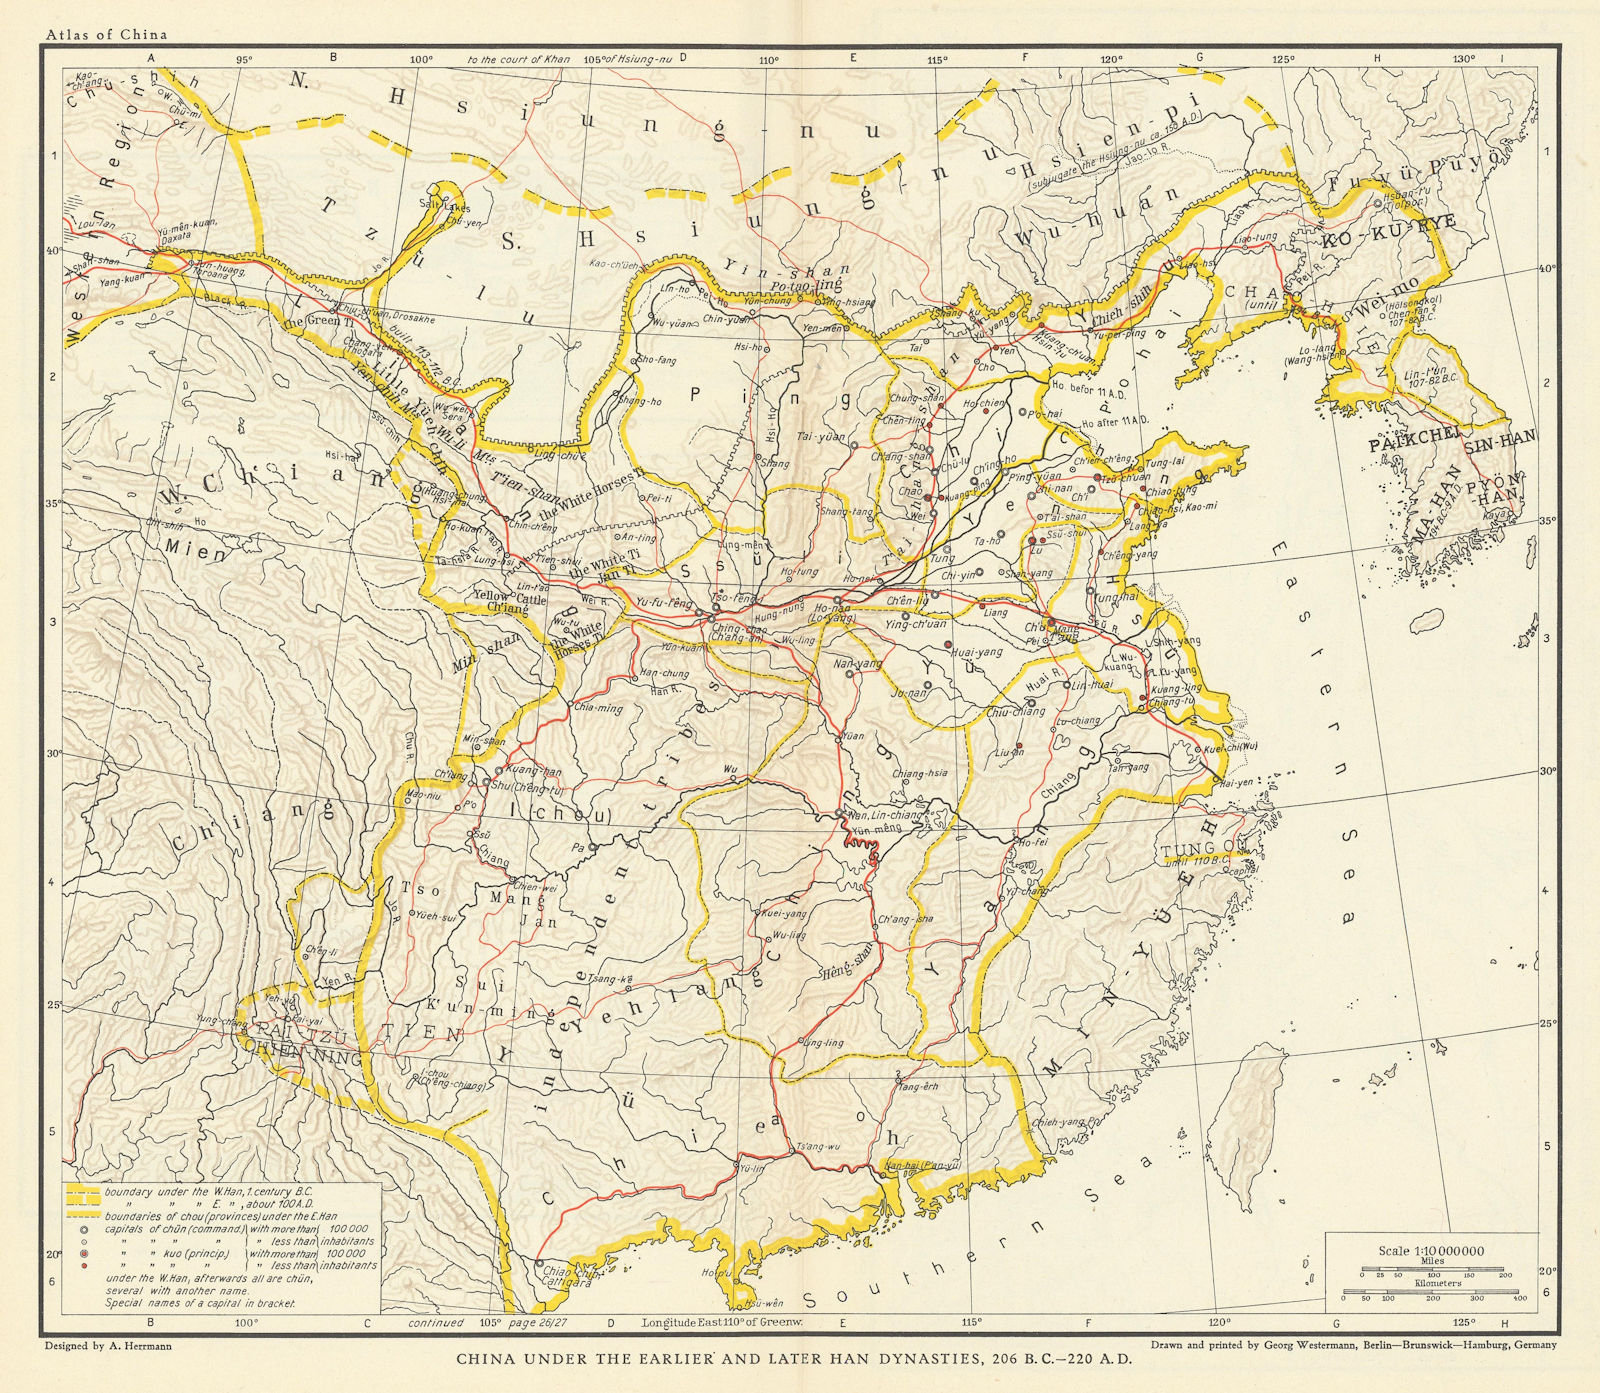 Associate Product China under the Earlier & Later Han Dynasties 206 BC-220 AD 1935 old map